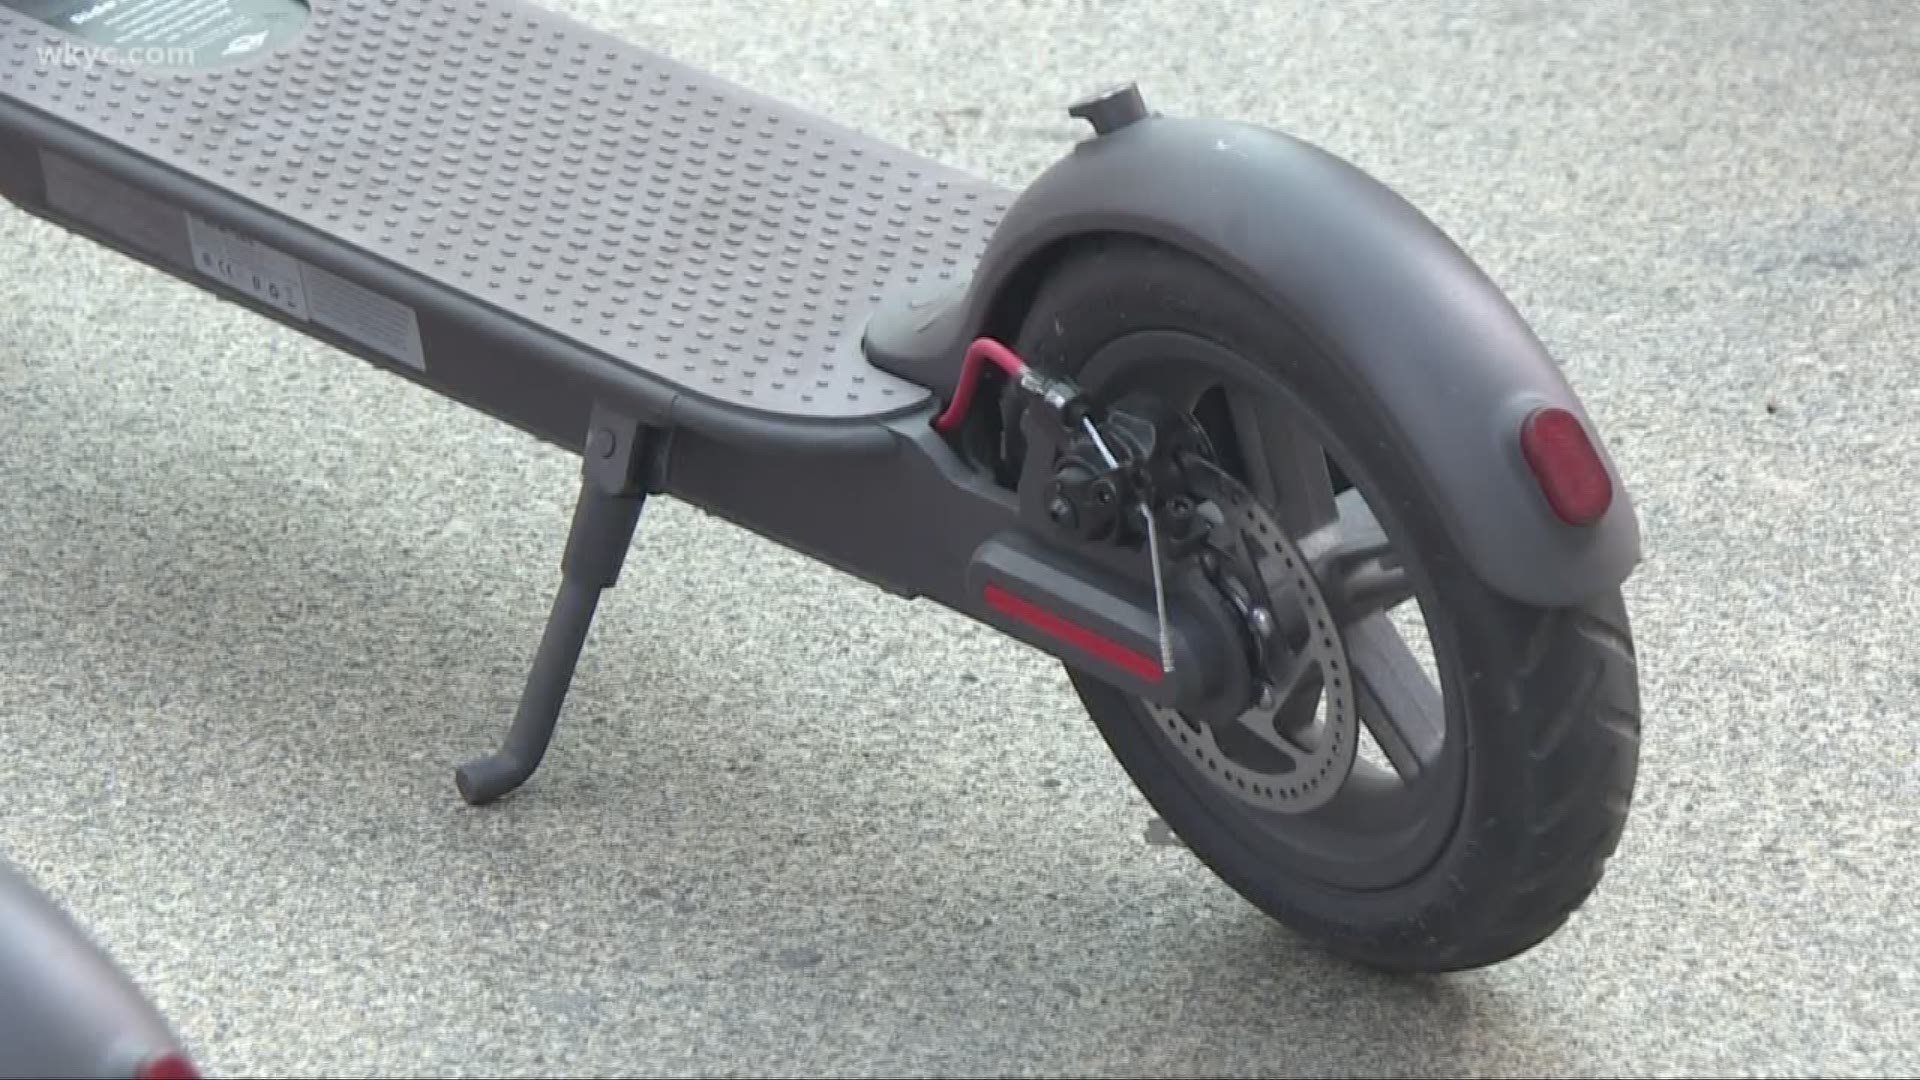 Bird scooters stopping Cleveland operations